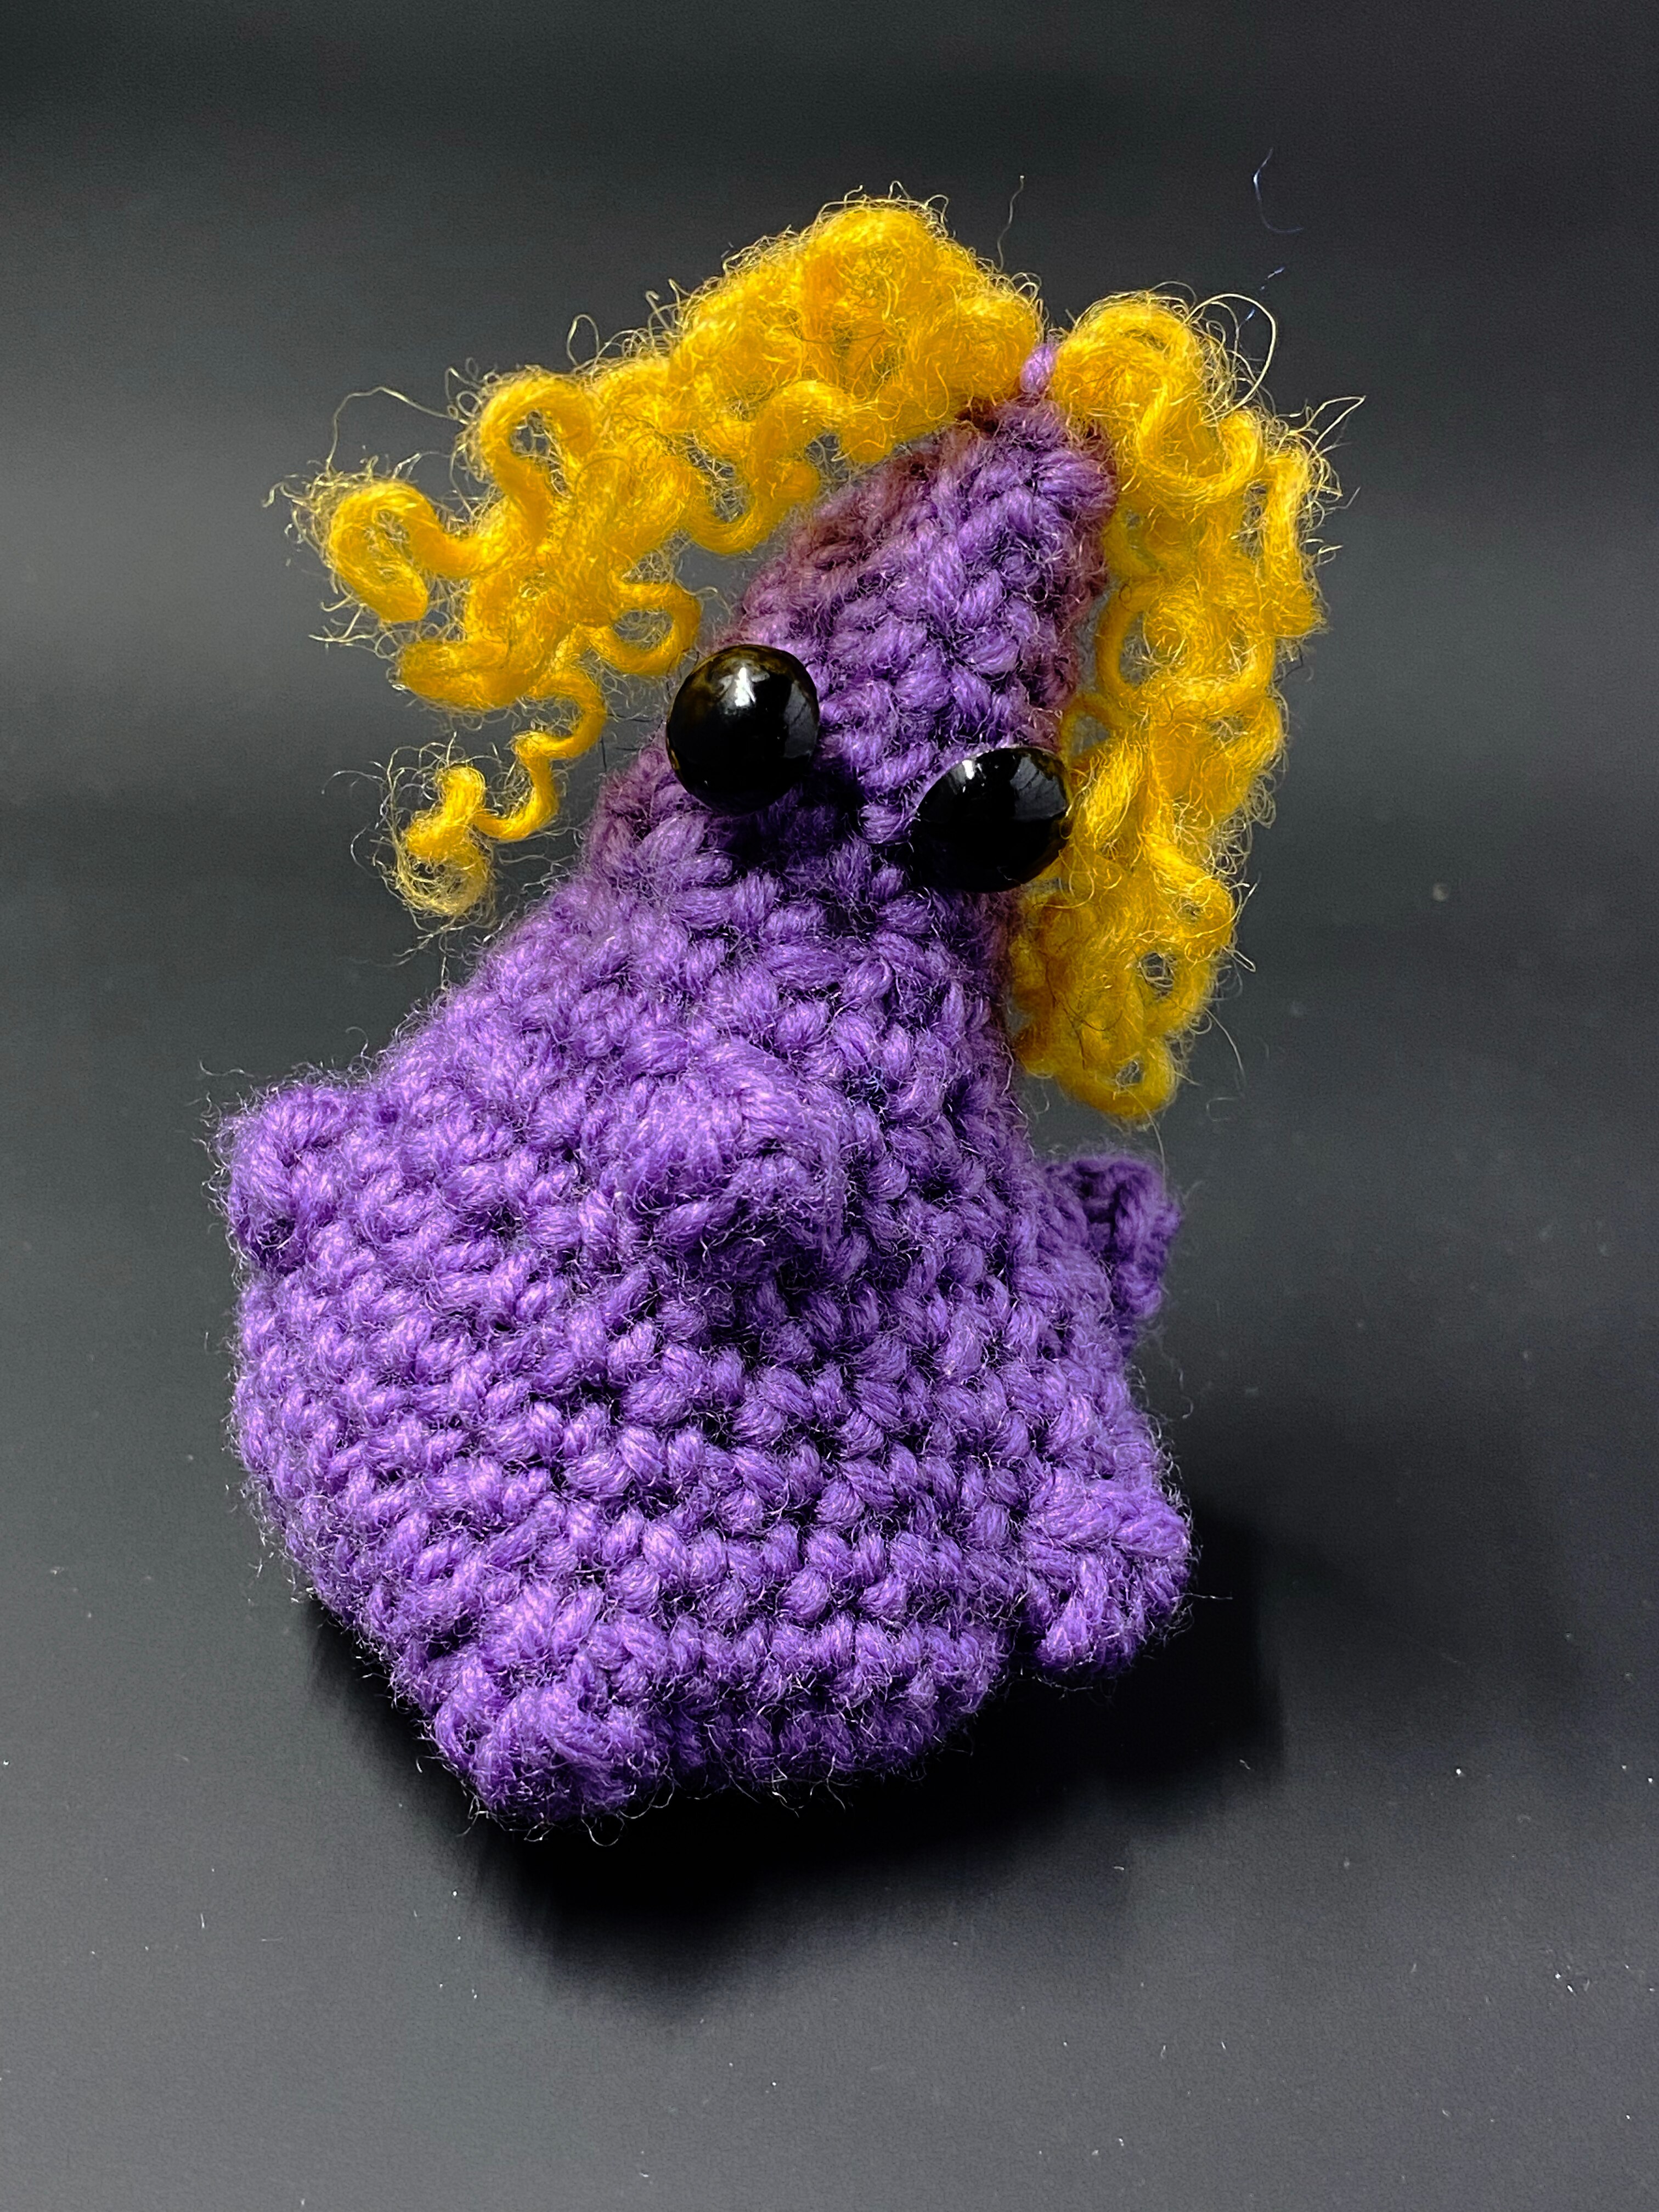 Picture of a crocheted organ, which is a purple oblong shape of a tumour with black button eyes and curly yellow knitted hair